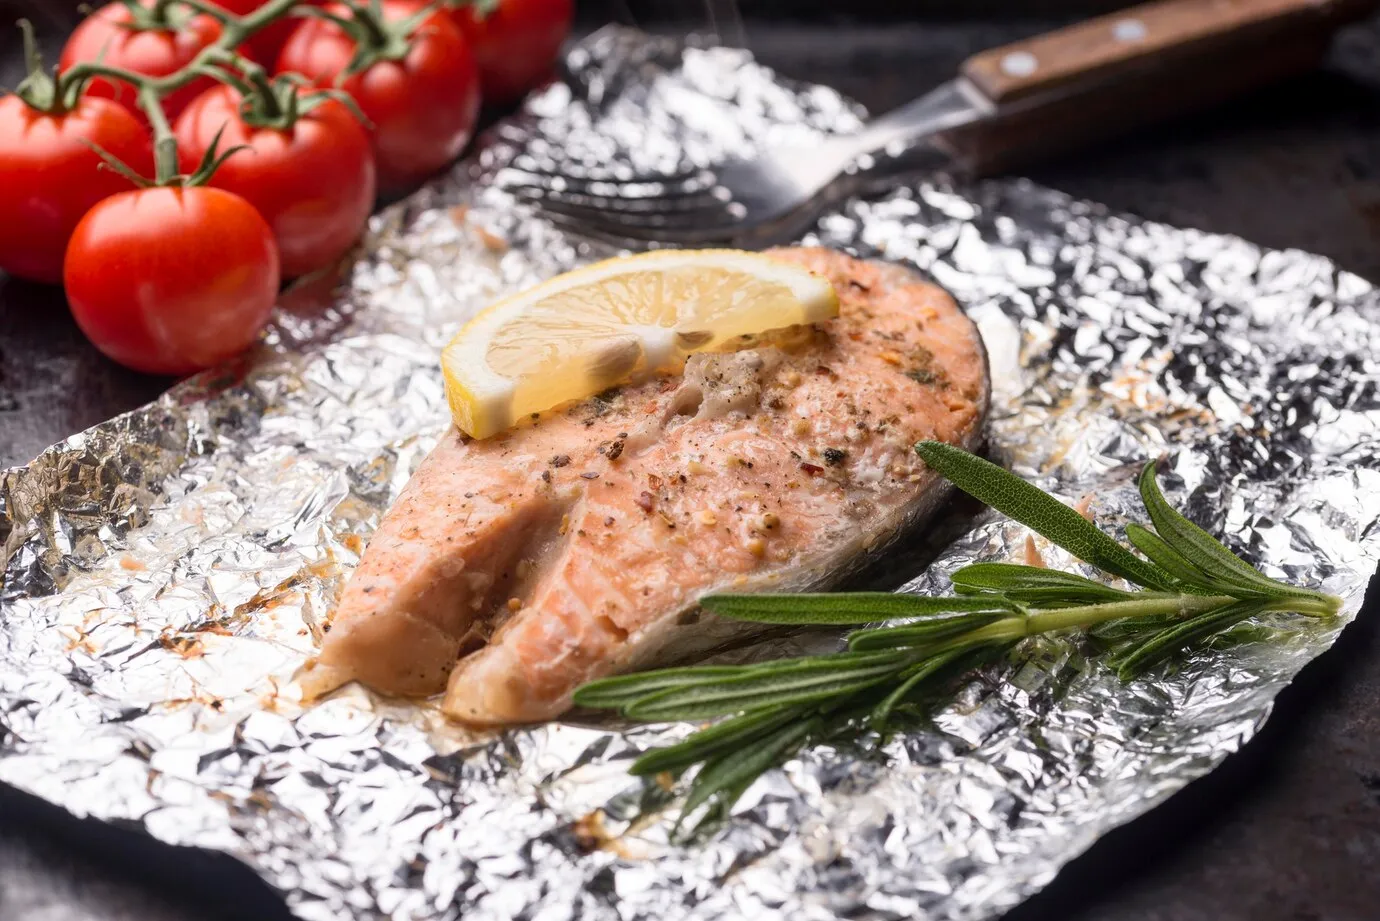 slice of salmon in a foil and tomato